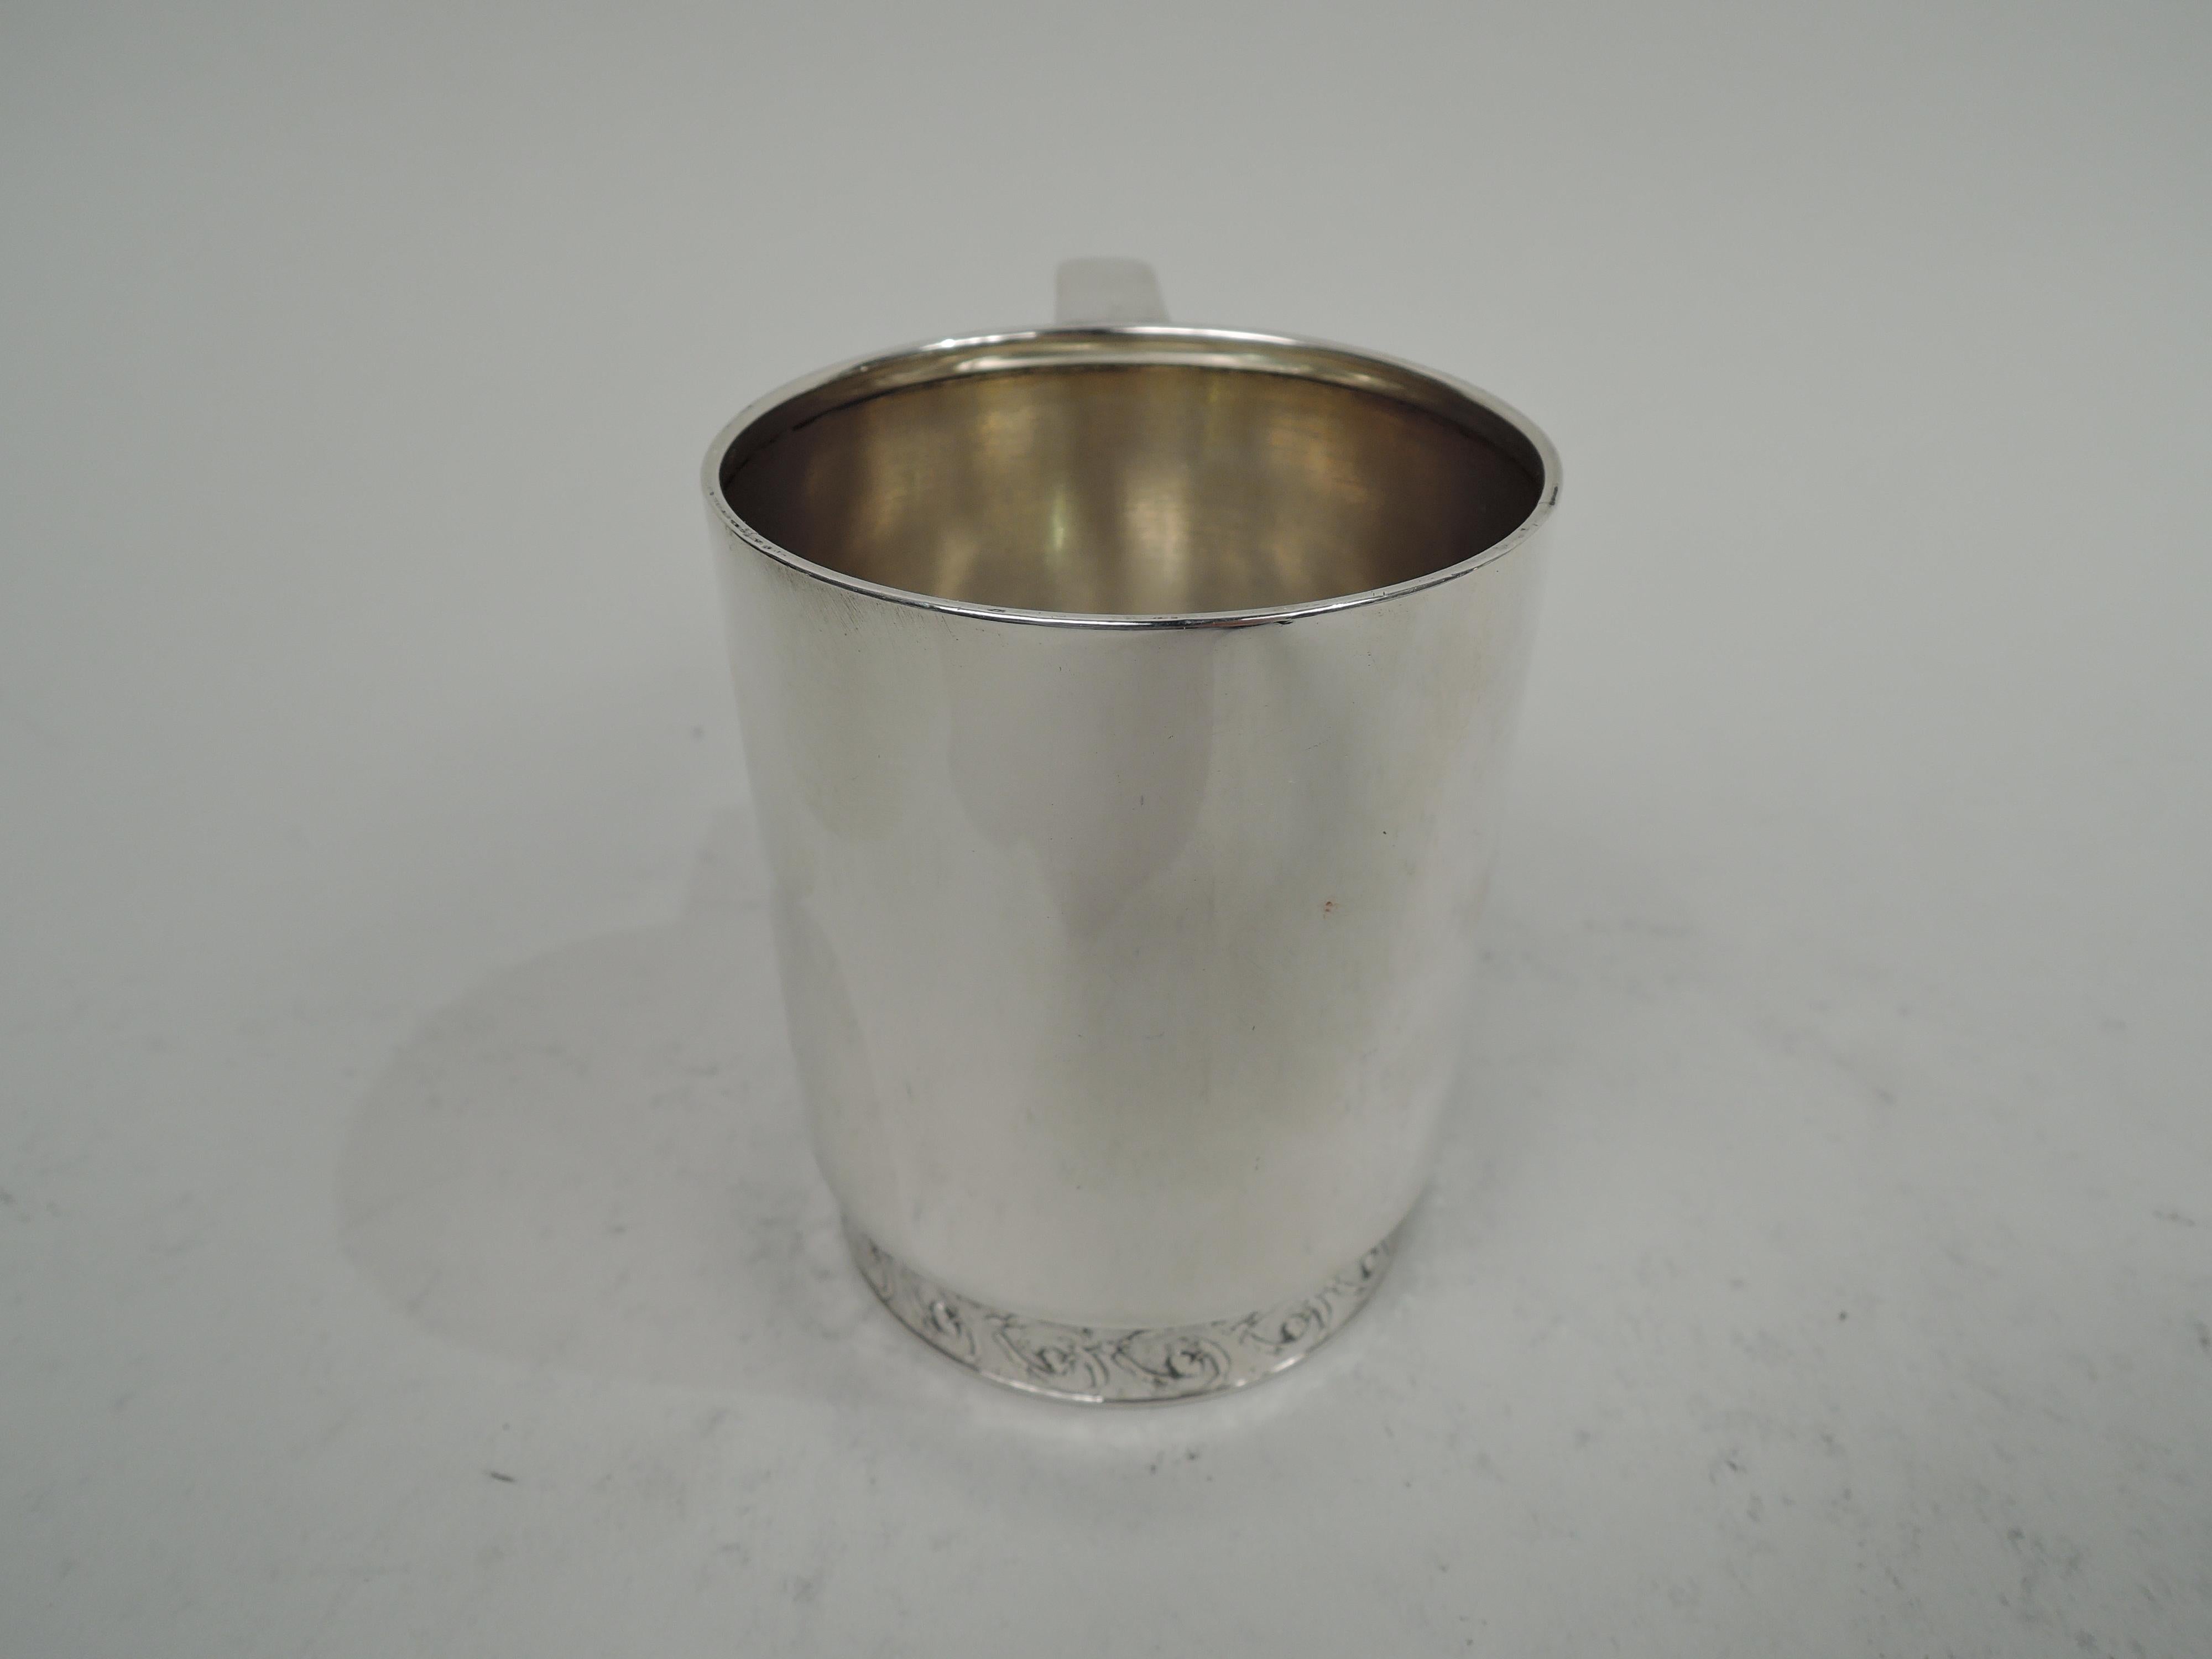 Victorian Classical sterling silver baby cup. Made by Tiffany & Co. in New York. Straight sides and scroll bracket handle. Short and inset foot with acid-etched flowering rinceaux border. Stylish and restrained with lots of room for engraving. Fully